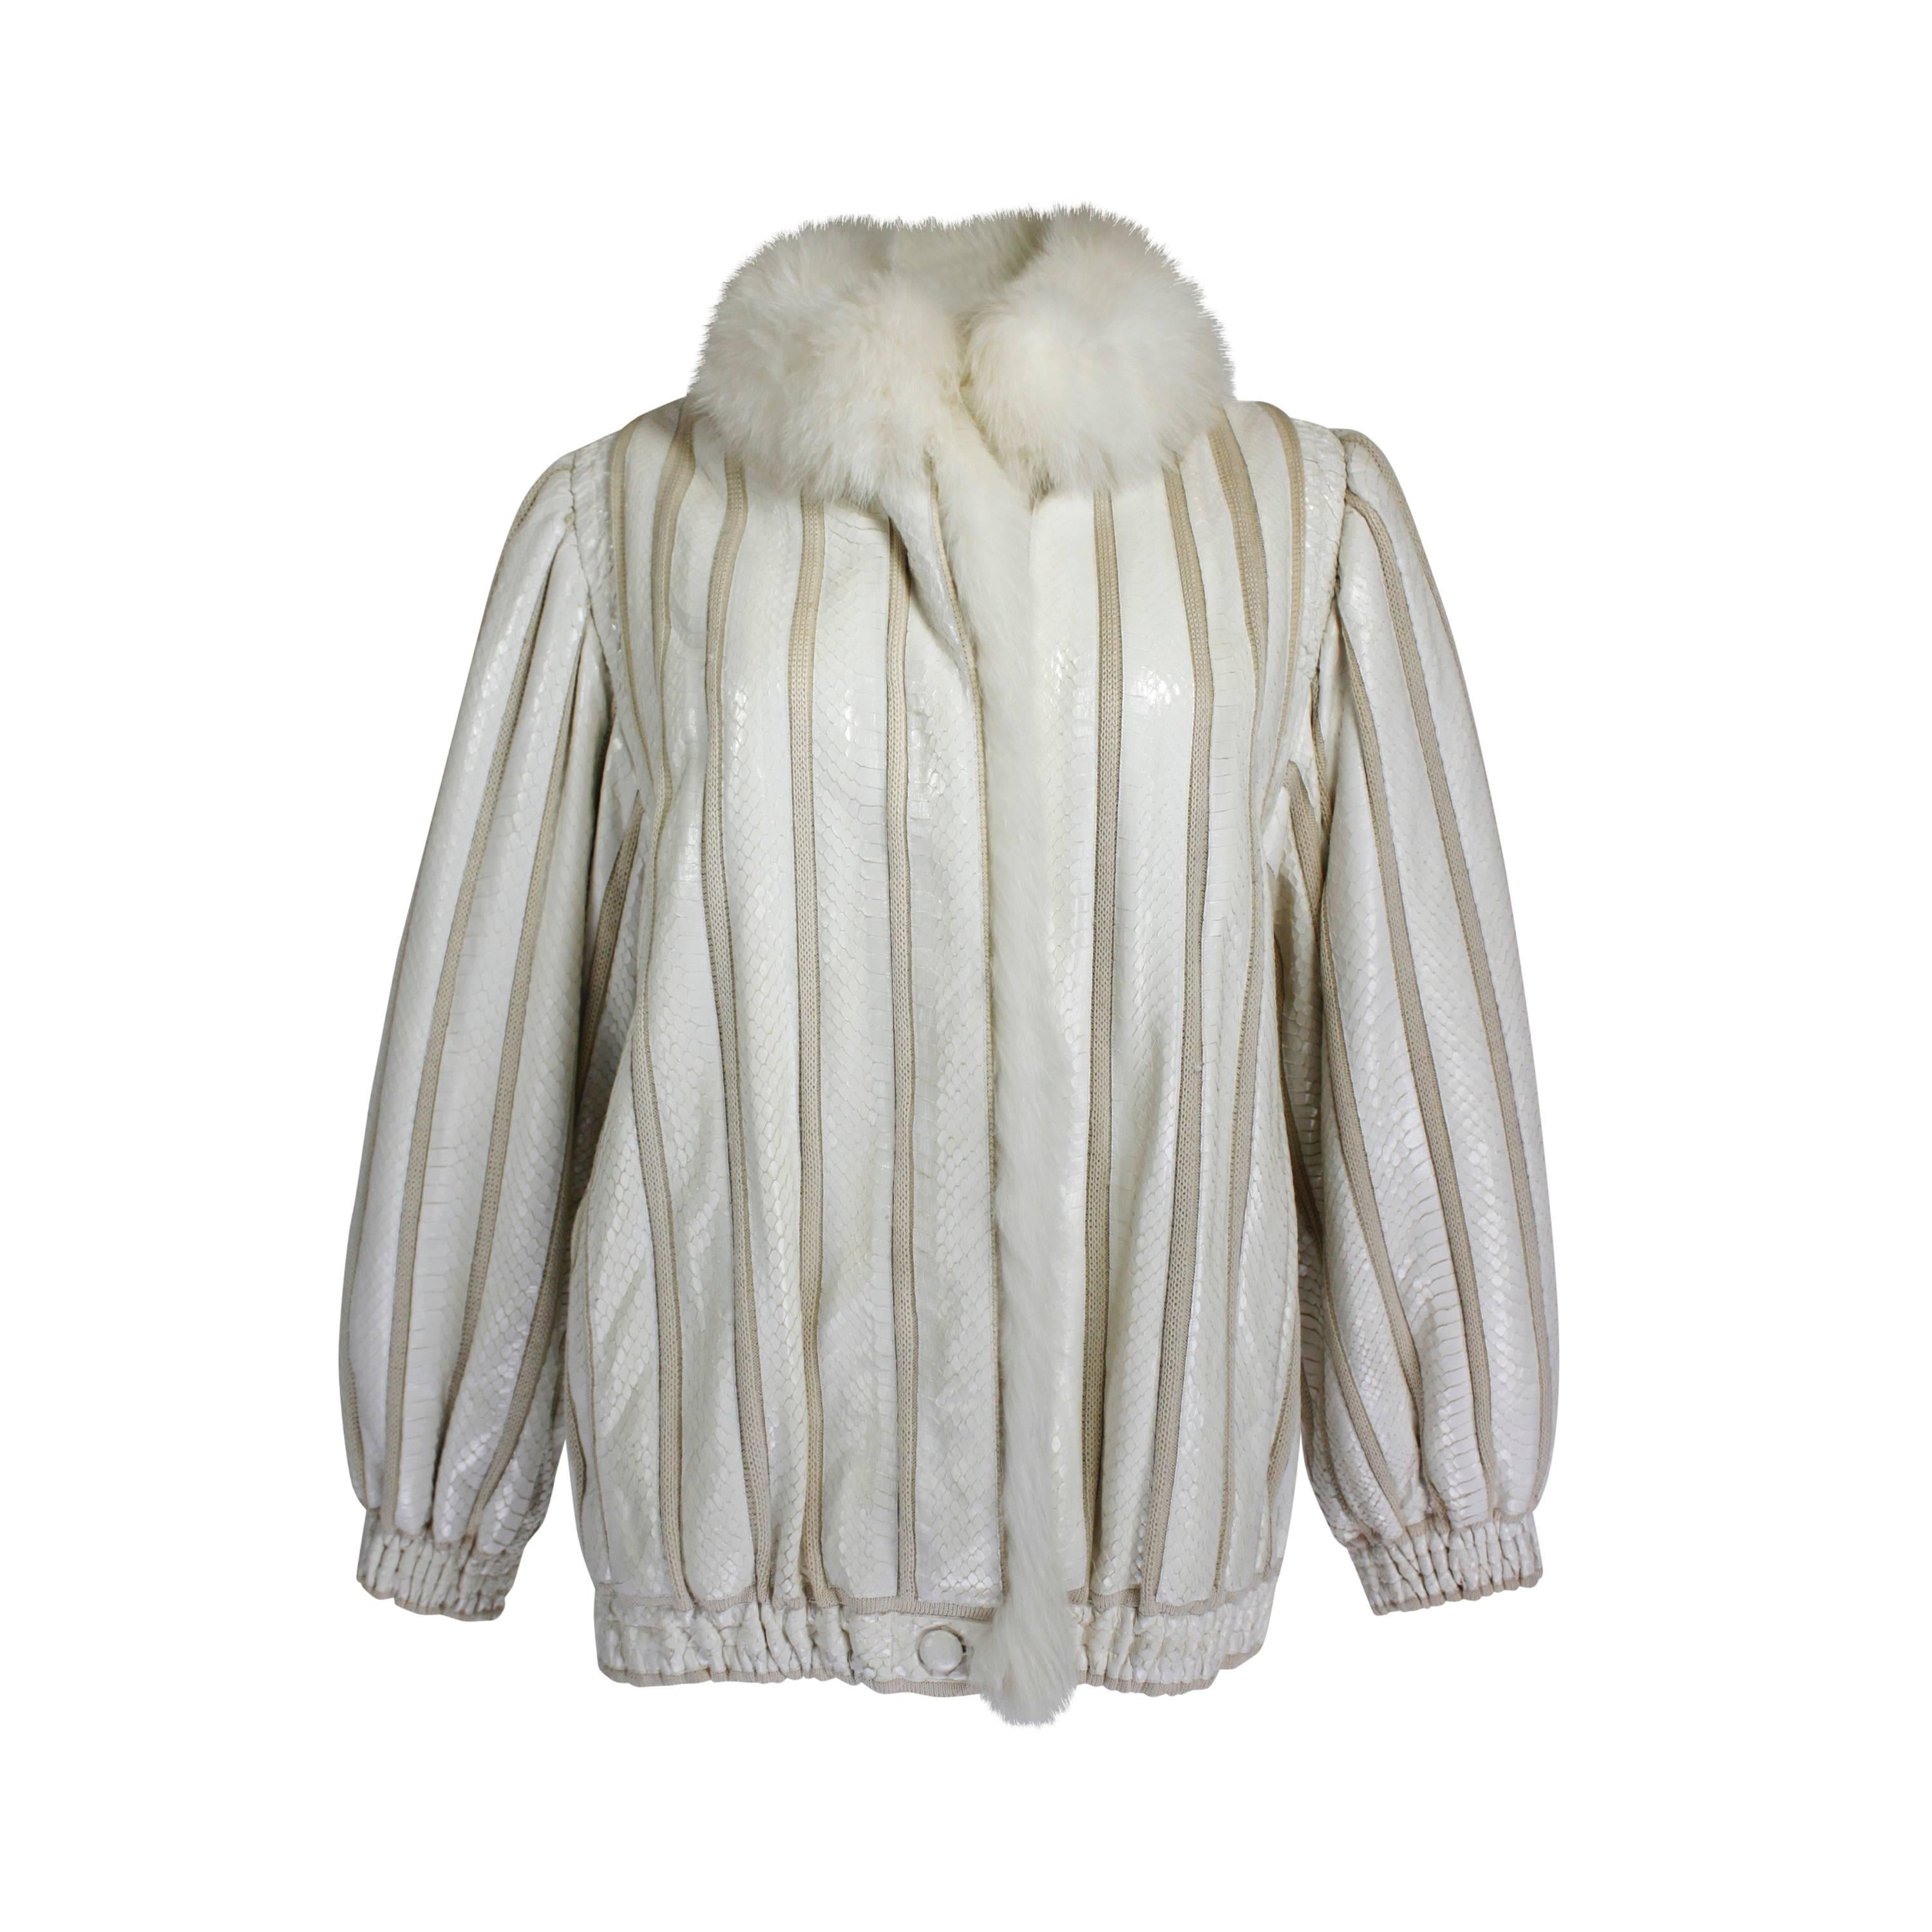 1980s Cream Snakeskin and Fur Knit Jacket